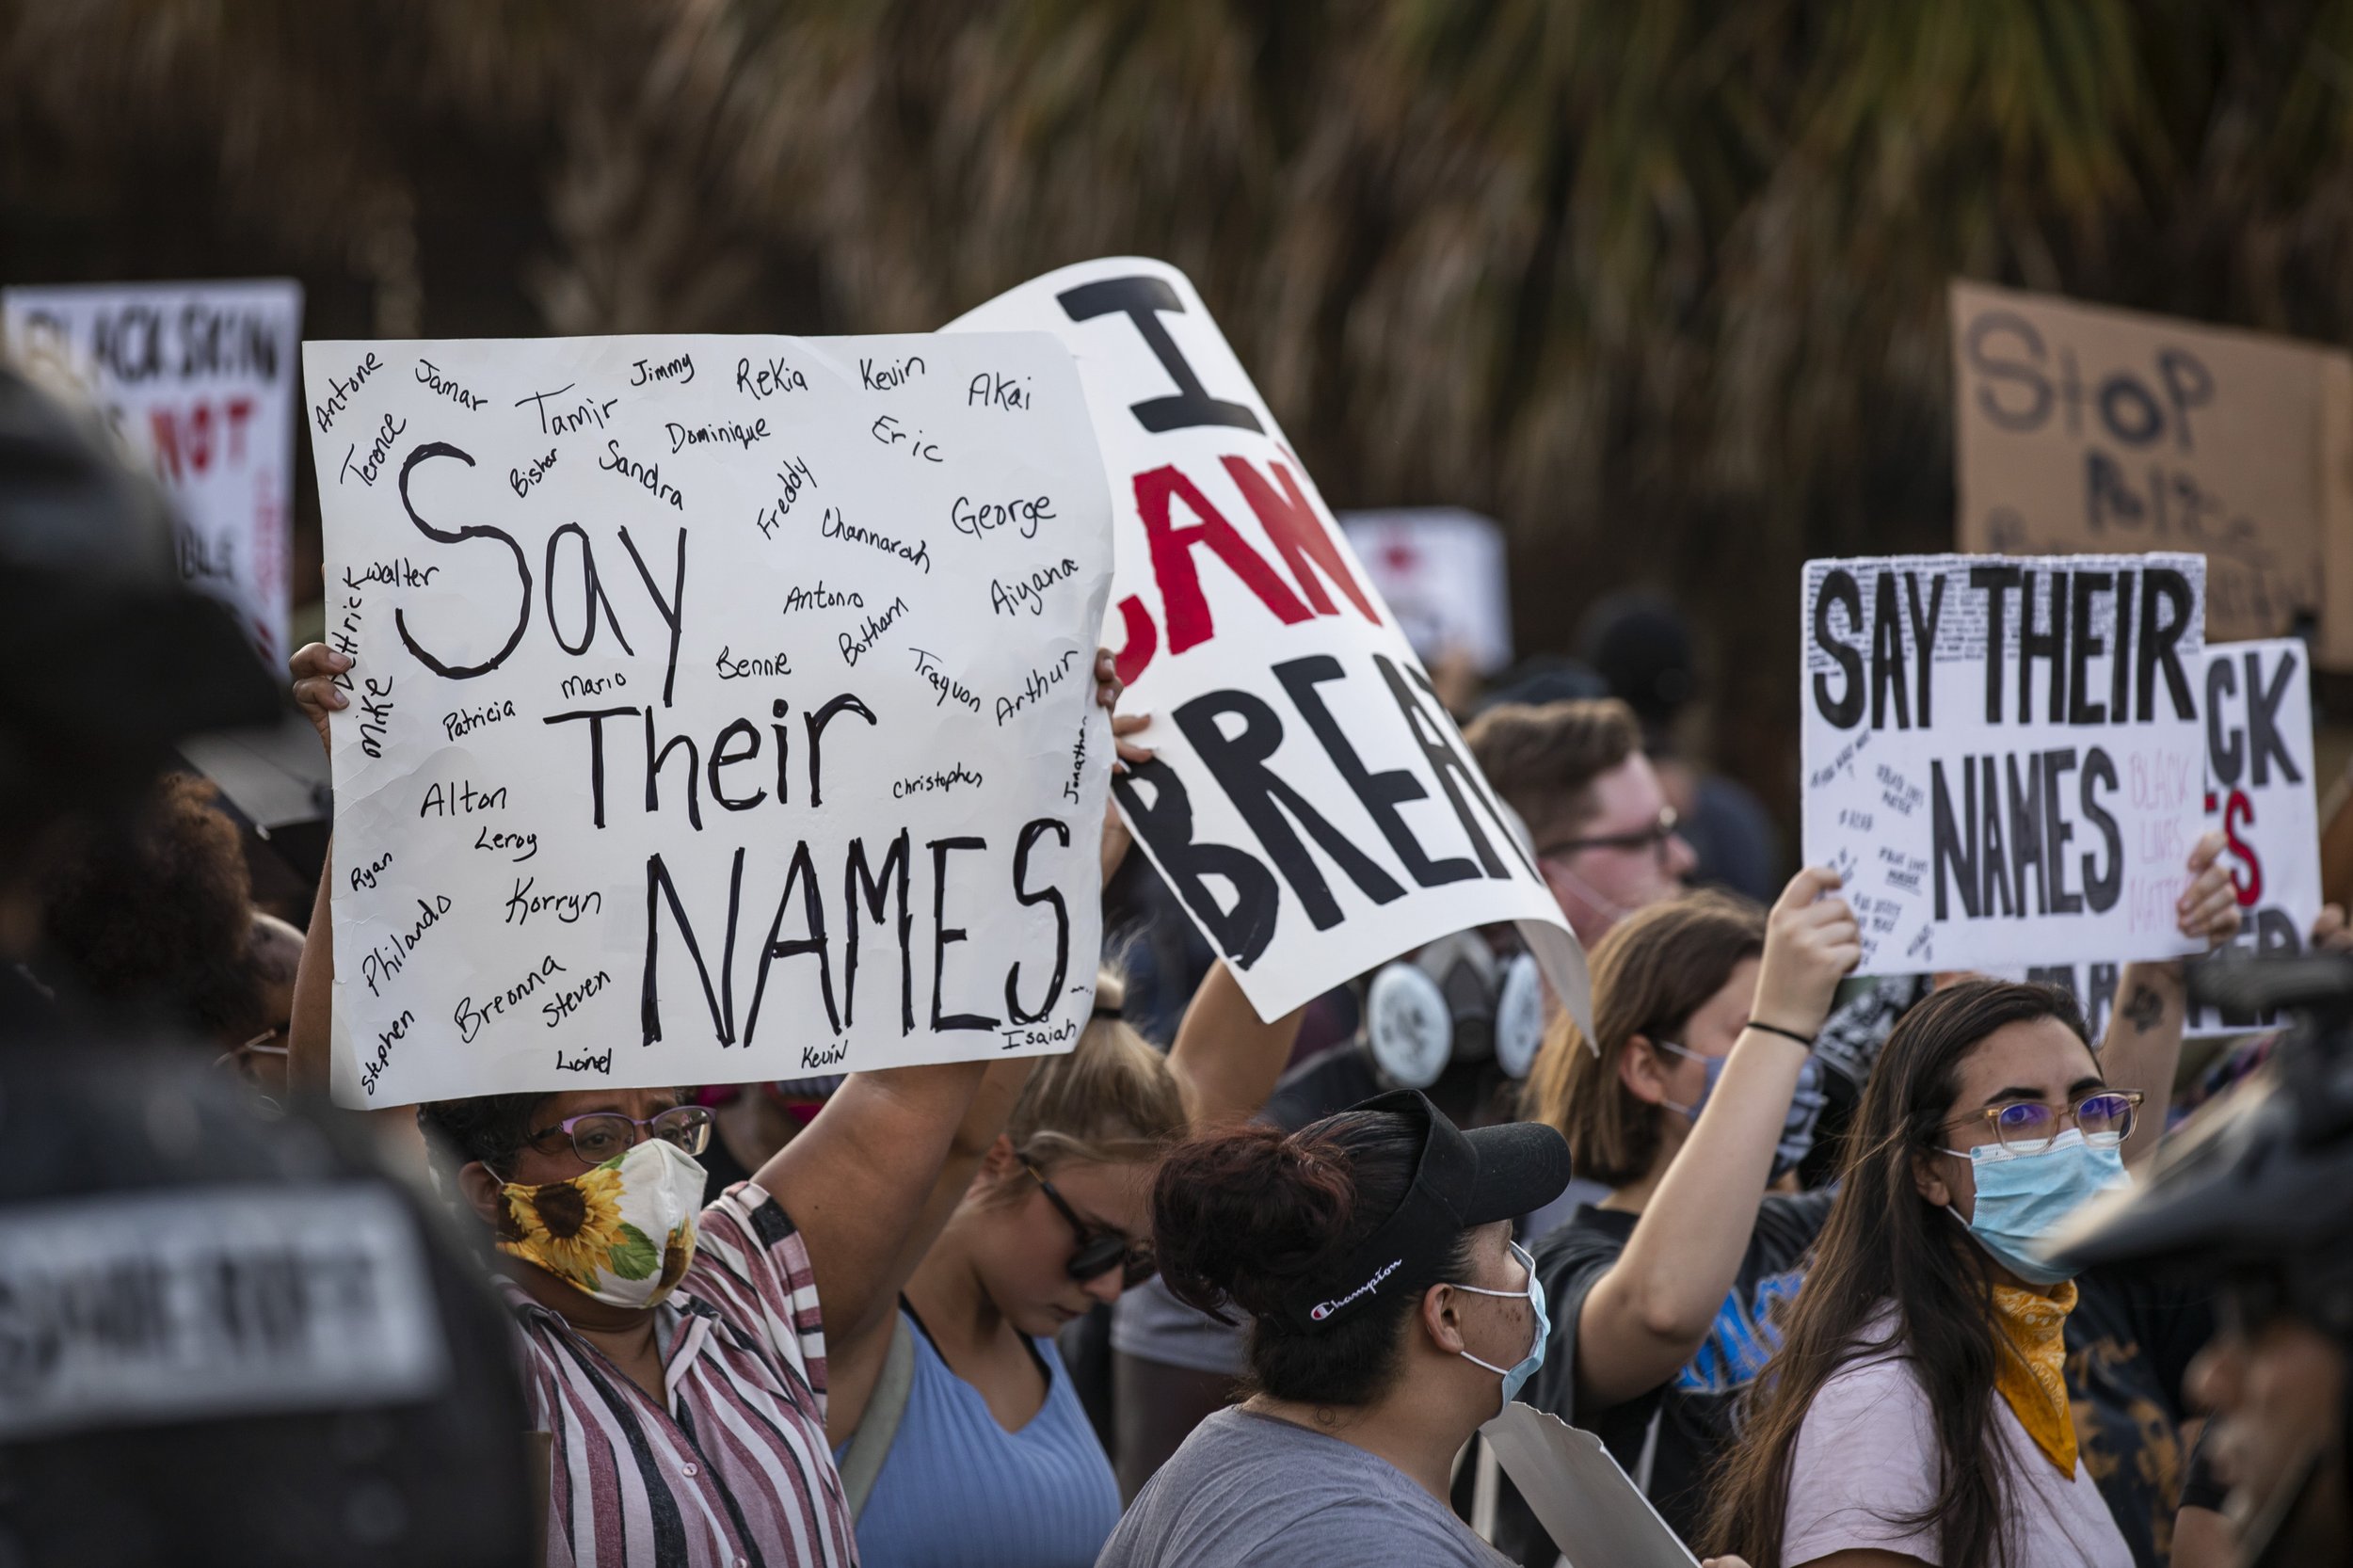  Protesters gather near an on ramp to State Road 408 during a demonstration demanding justice for George Floyd in Orlando on Sunday, May 31, 2020. 